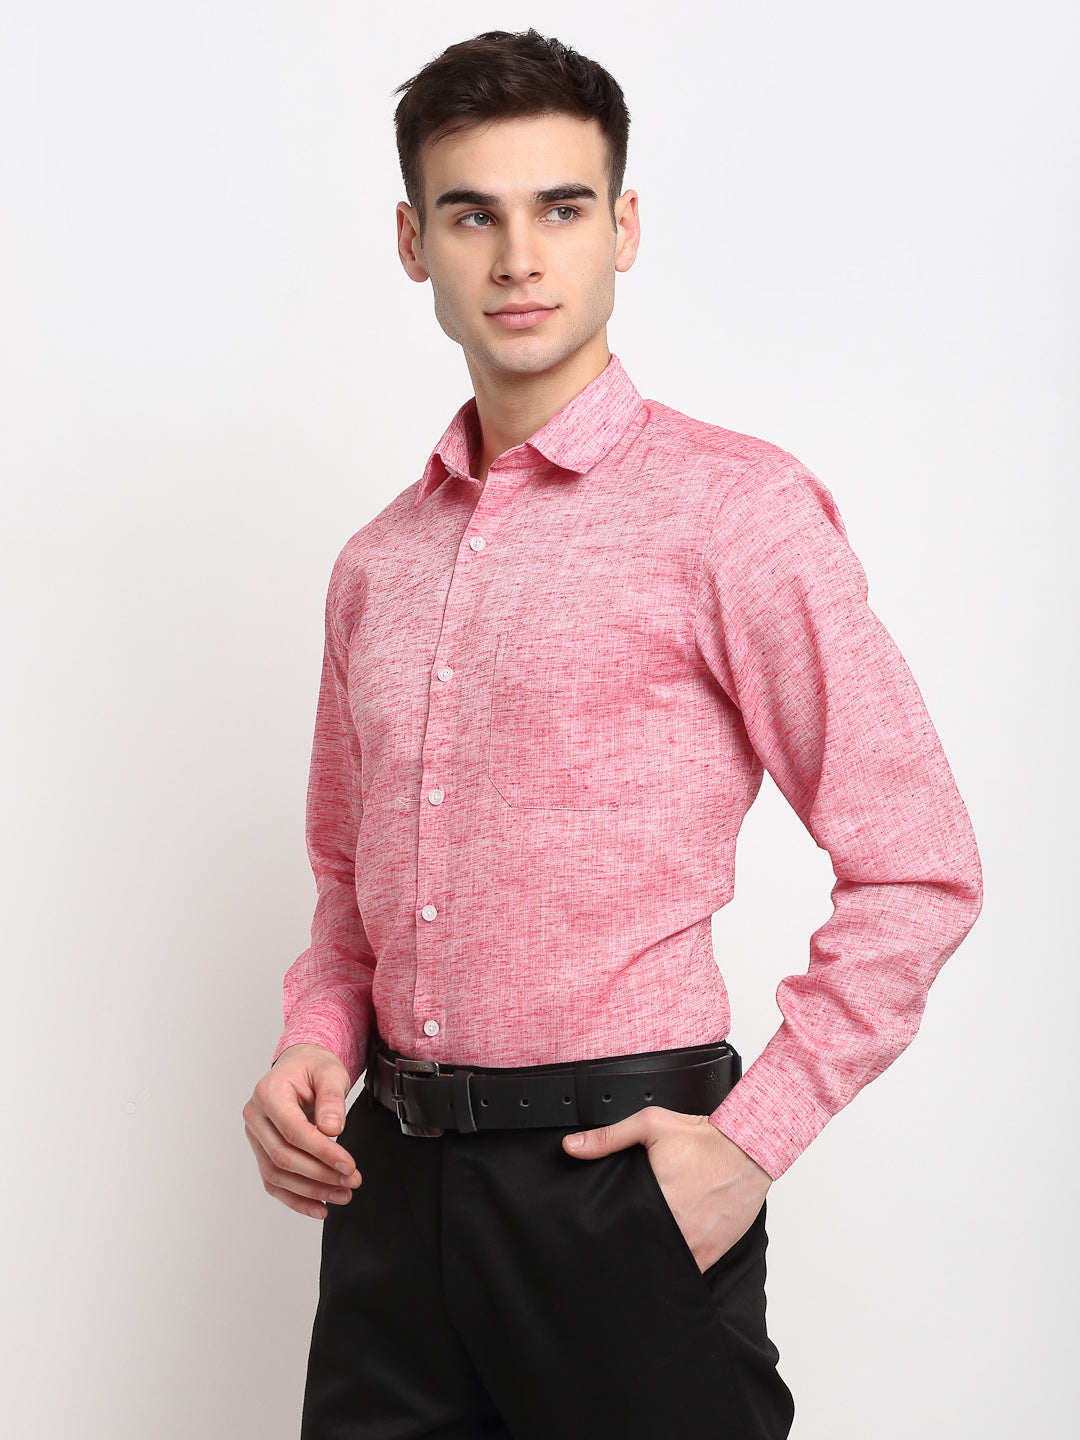 Men's Red Solid Cotton Formal Shirt ( SF 782Red ) - Jainish